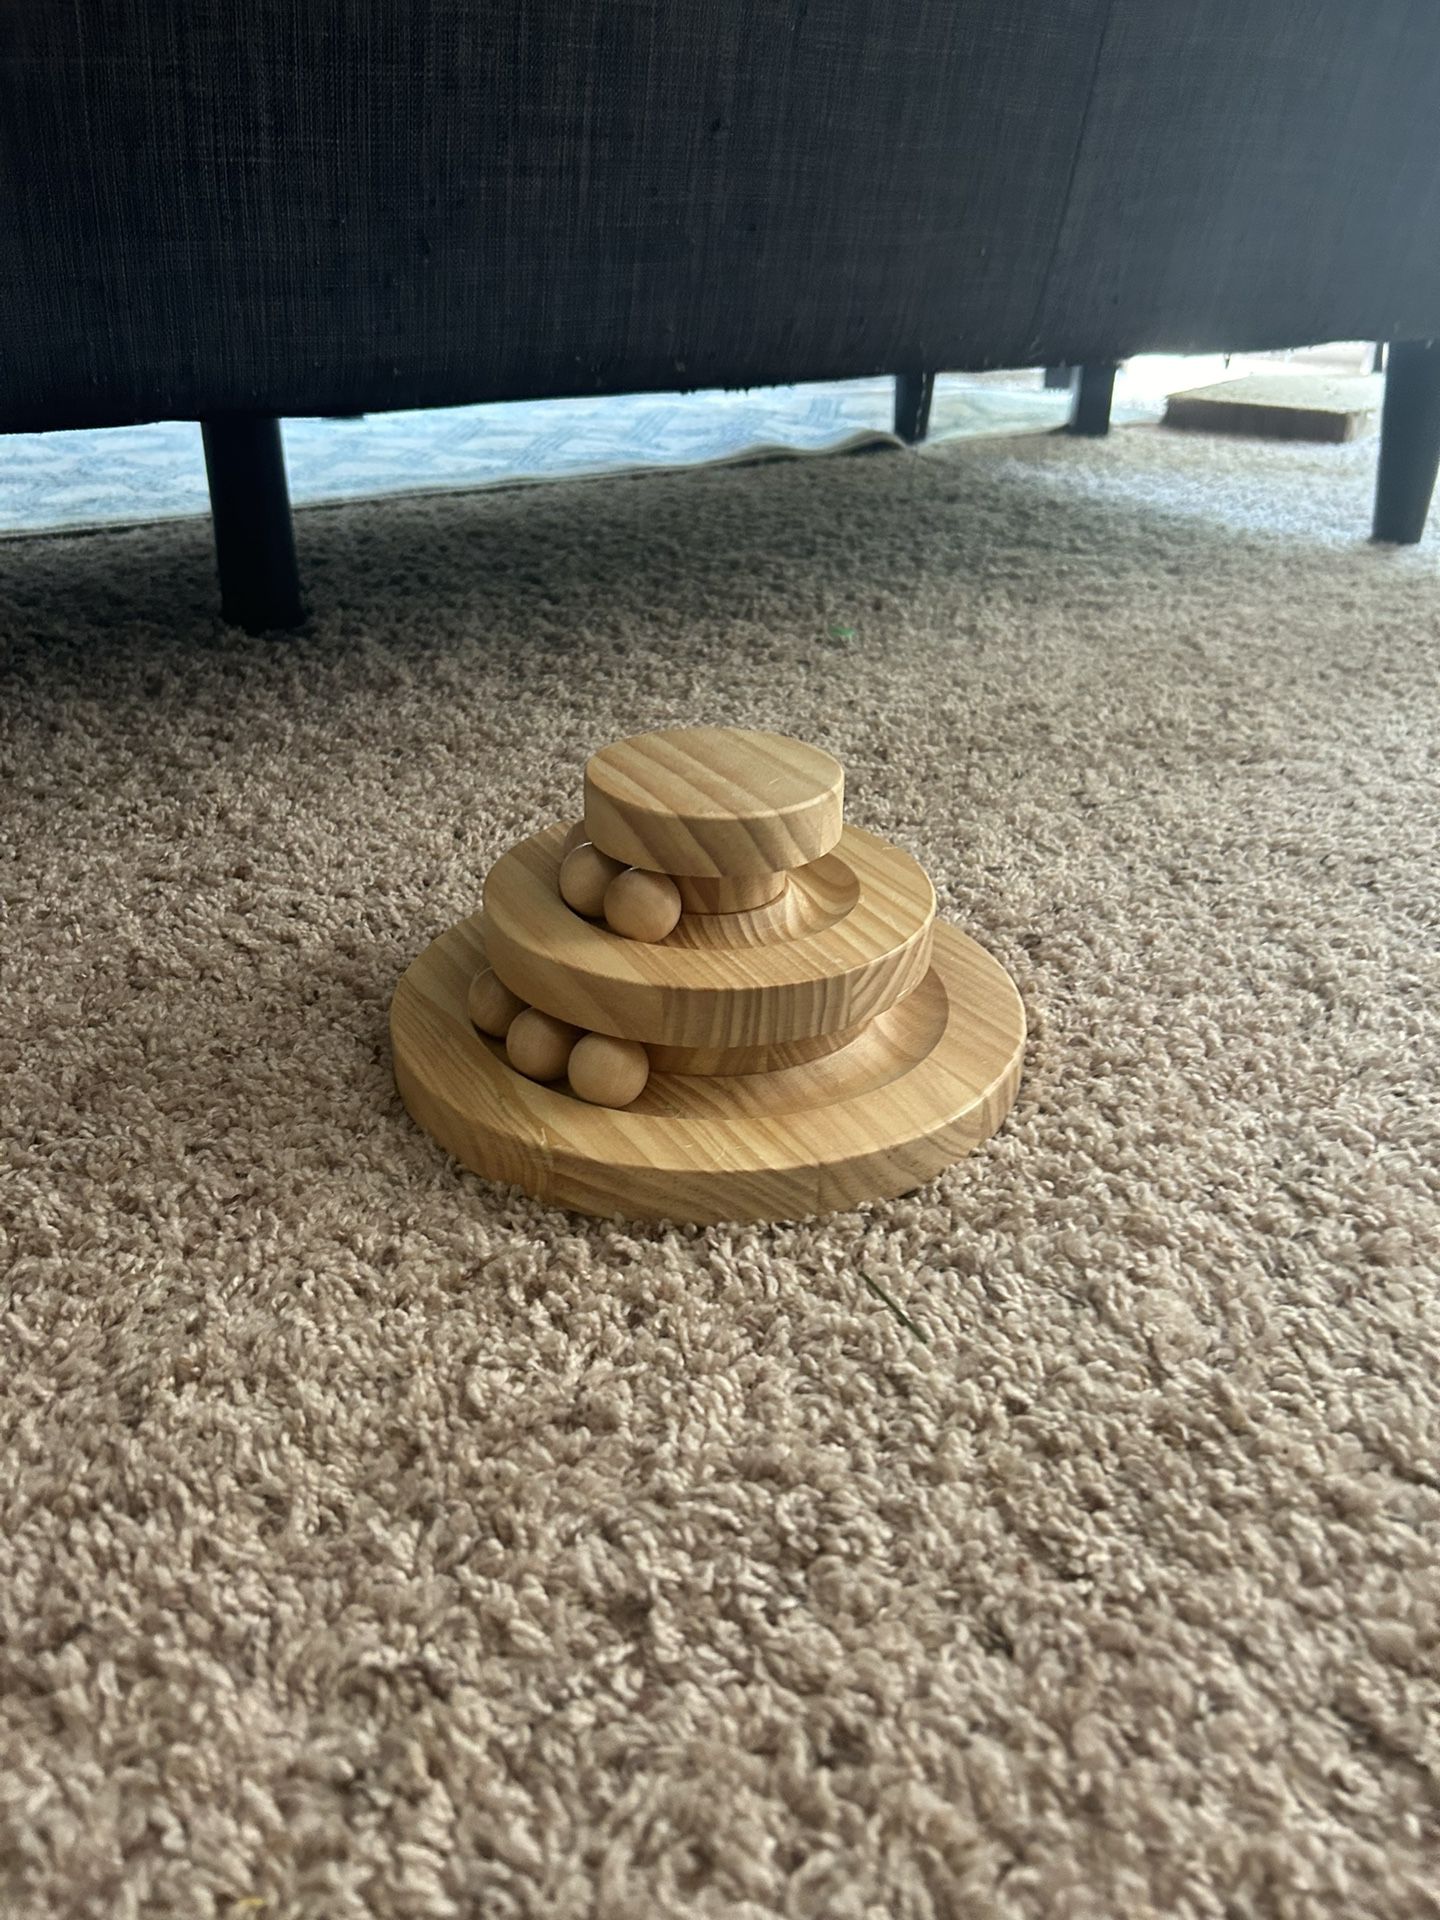 Wooden Cat Toy